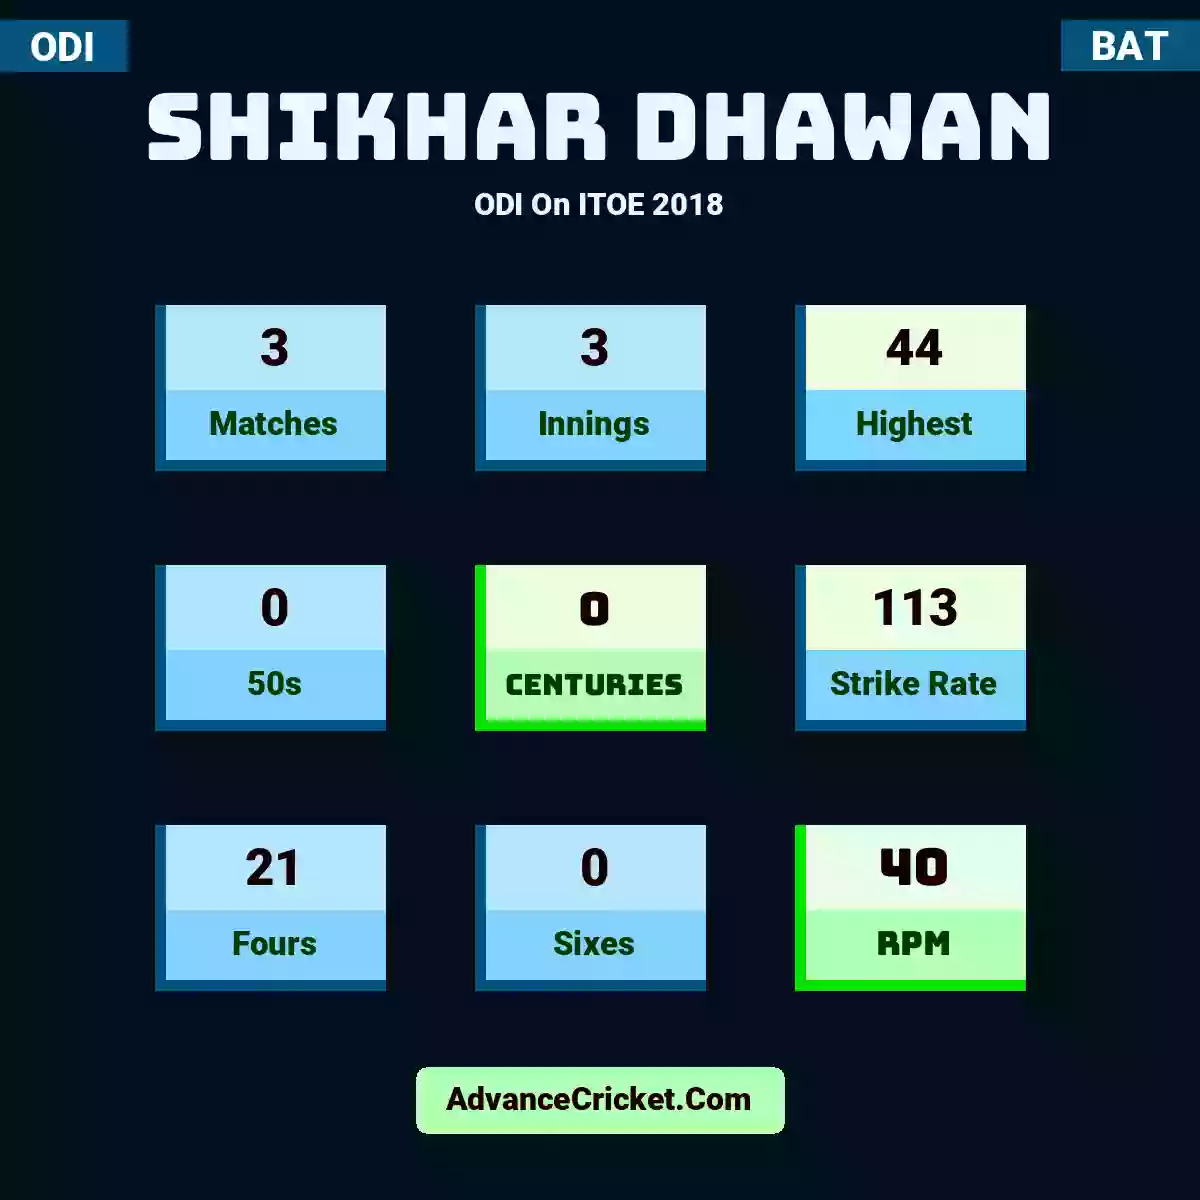 Shikhar Dhawan ODI  On ITOE 2018, Shikhar Dhawan played 3 matches, scored 44 runs as highest, 0 half-centuries, and 0 centuries, with a strike rate of 113. S.Dhawan hit 21 fours and 0 sixes, with an RPM of 40.